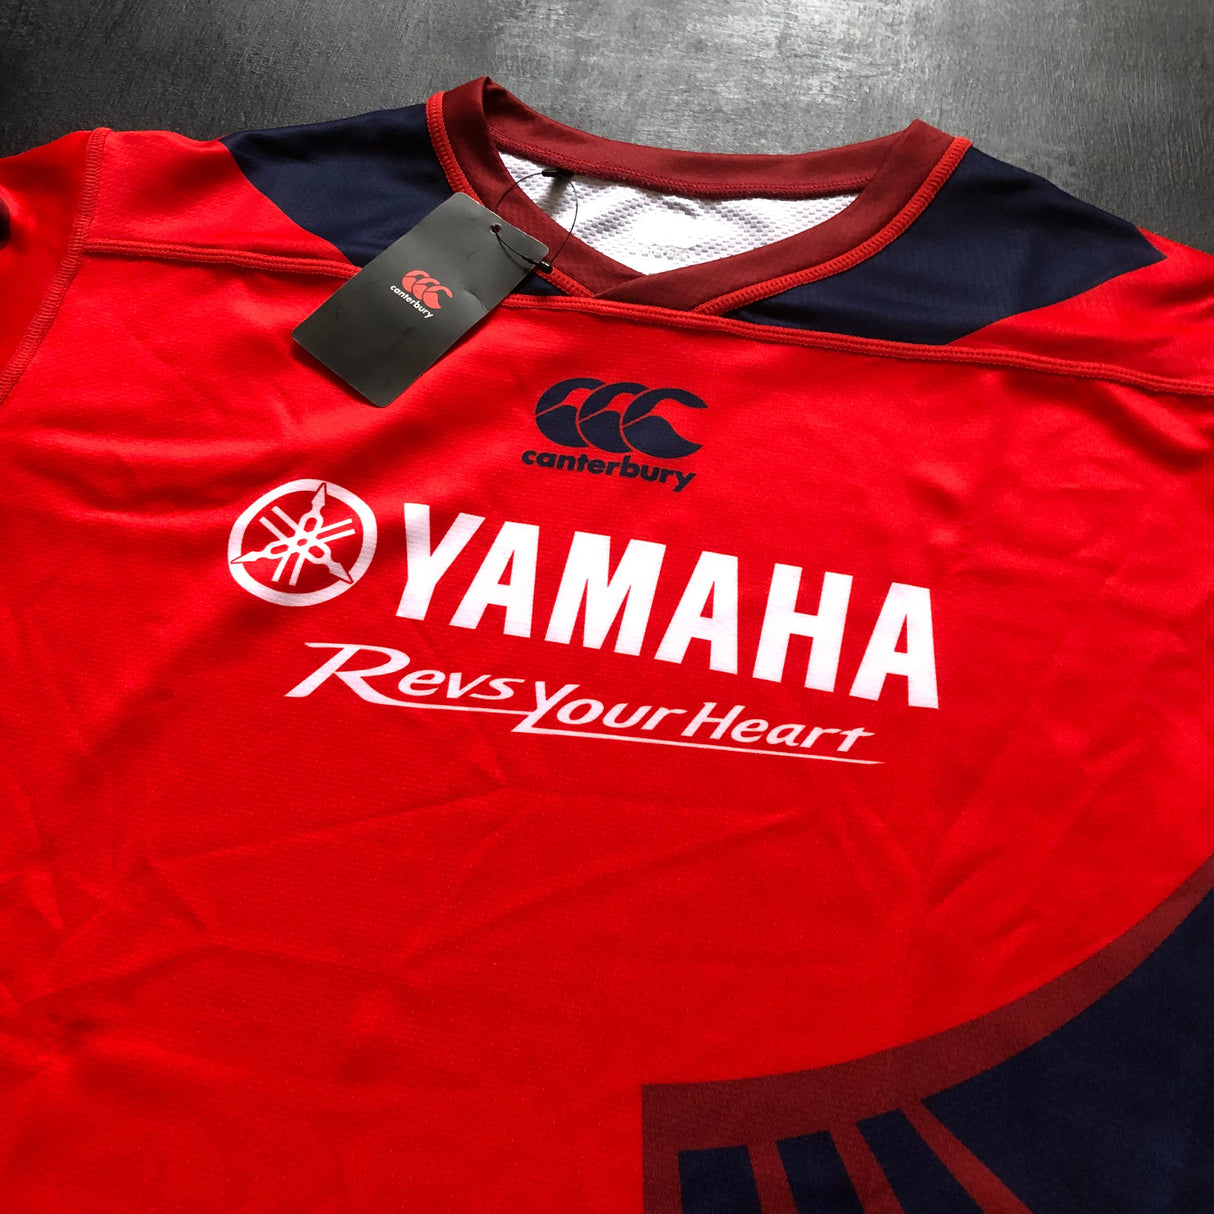 Yamaha Júbilo Rugby Team Jersey 2021 (Japan Top League) Large BNWT Underdog Rugby - The Tier 2 Rugby Shop 